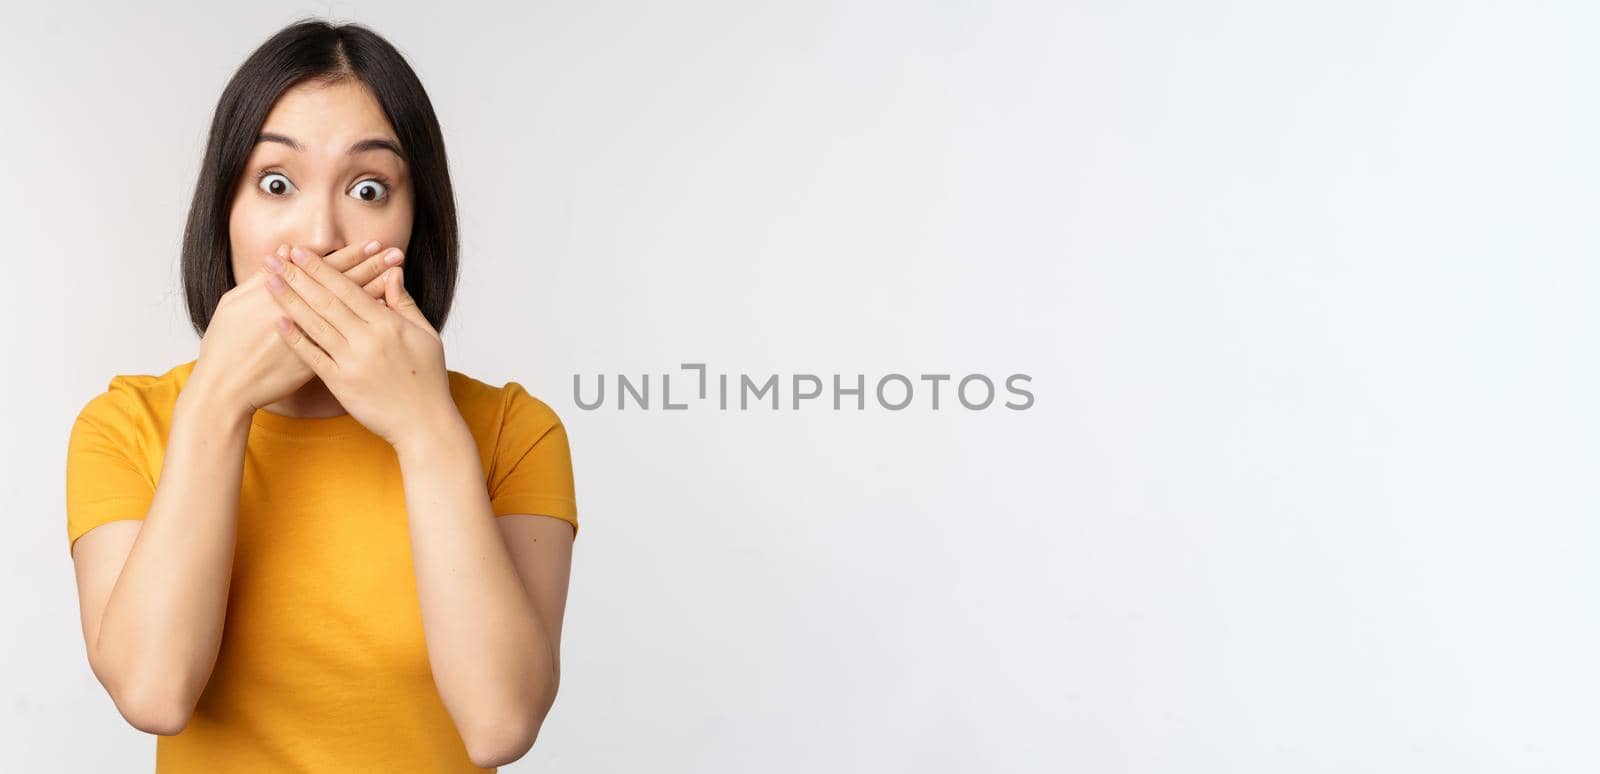 Shocked asian woman cover mouth with hands, looking startled with speechless face expression, standing in yellow tshirt against white background by Benzoix